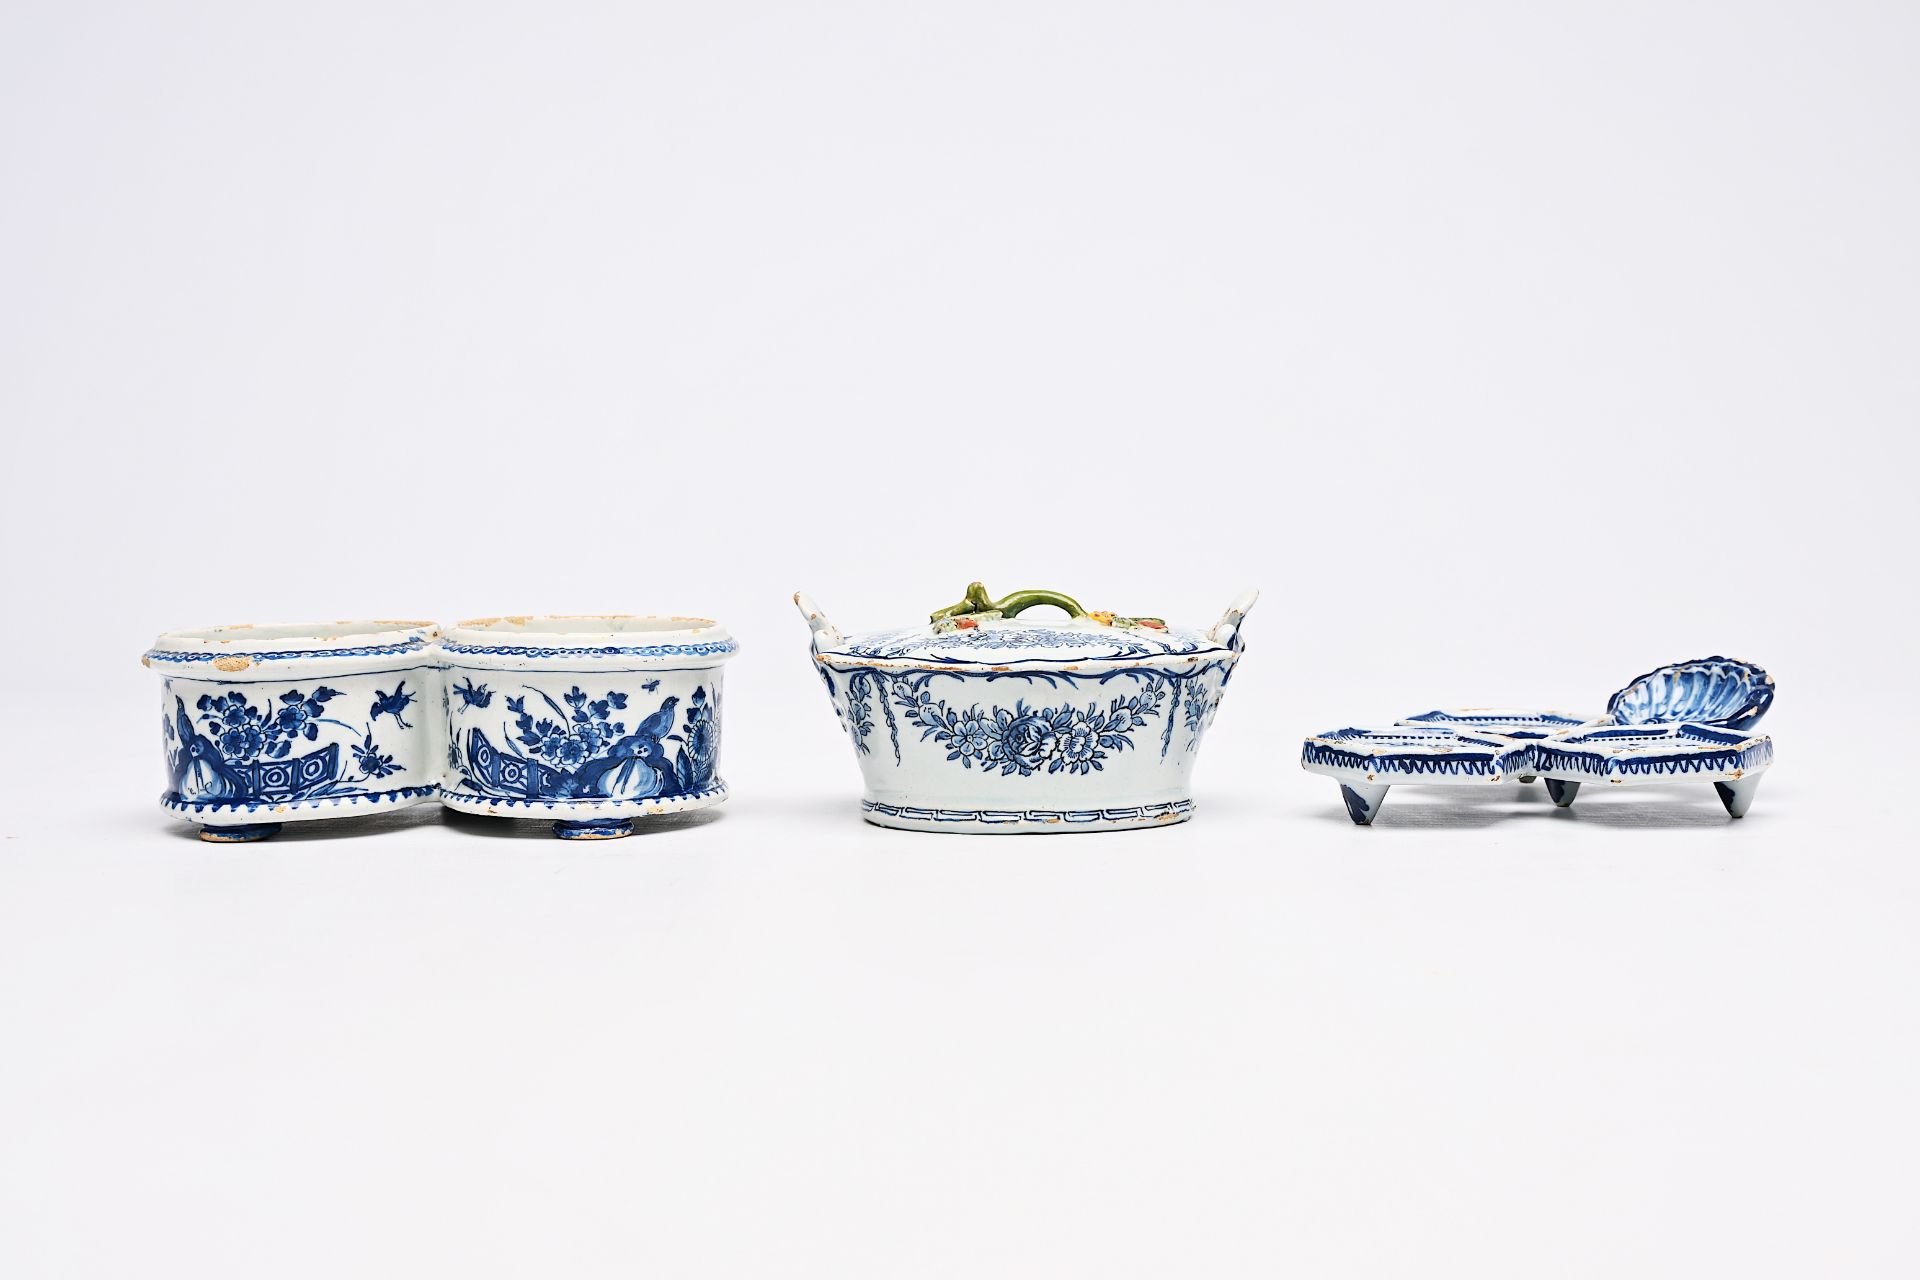 A Dutch Delft blue and white butter tub, an oil and vinegar holder and a spice dish with floral desi - Image 2 of 9